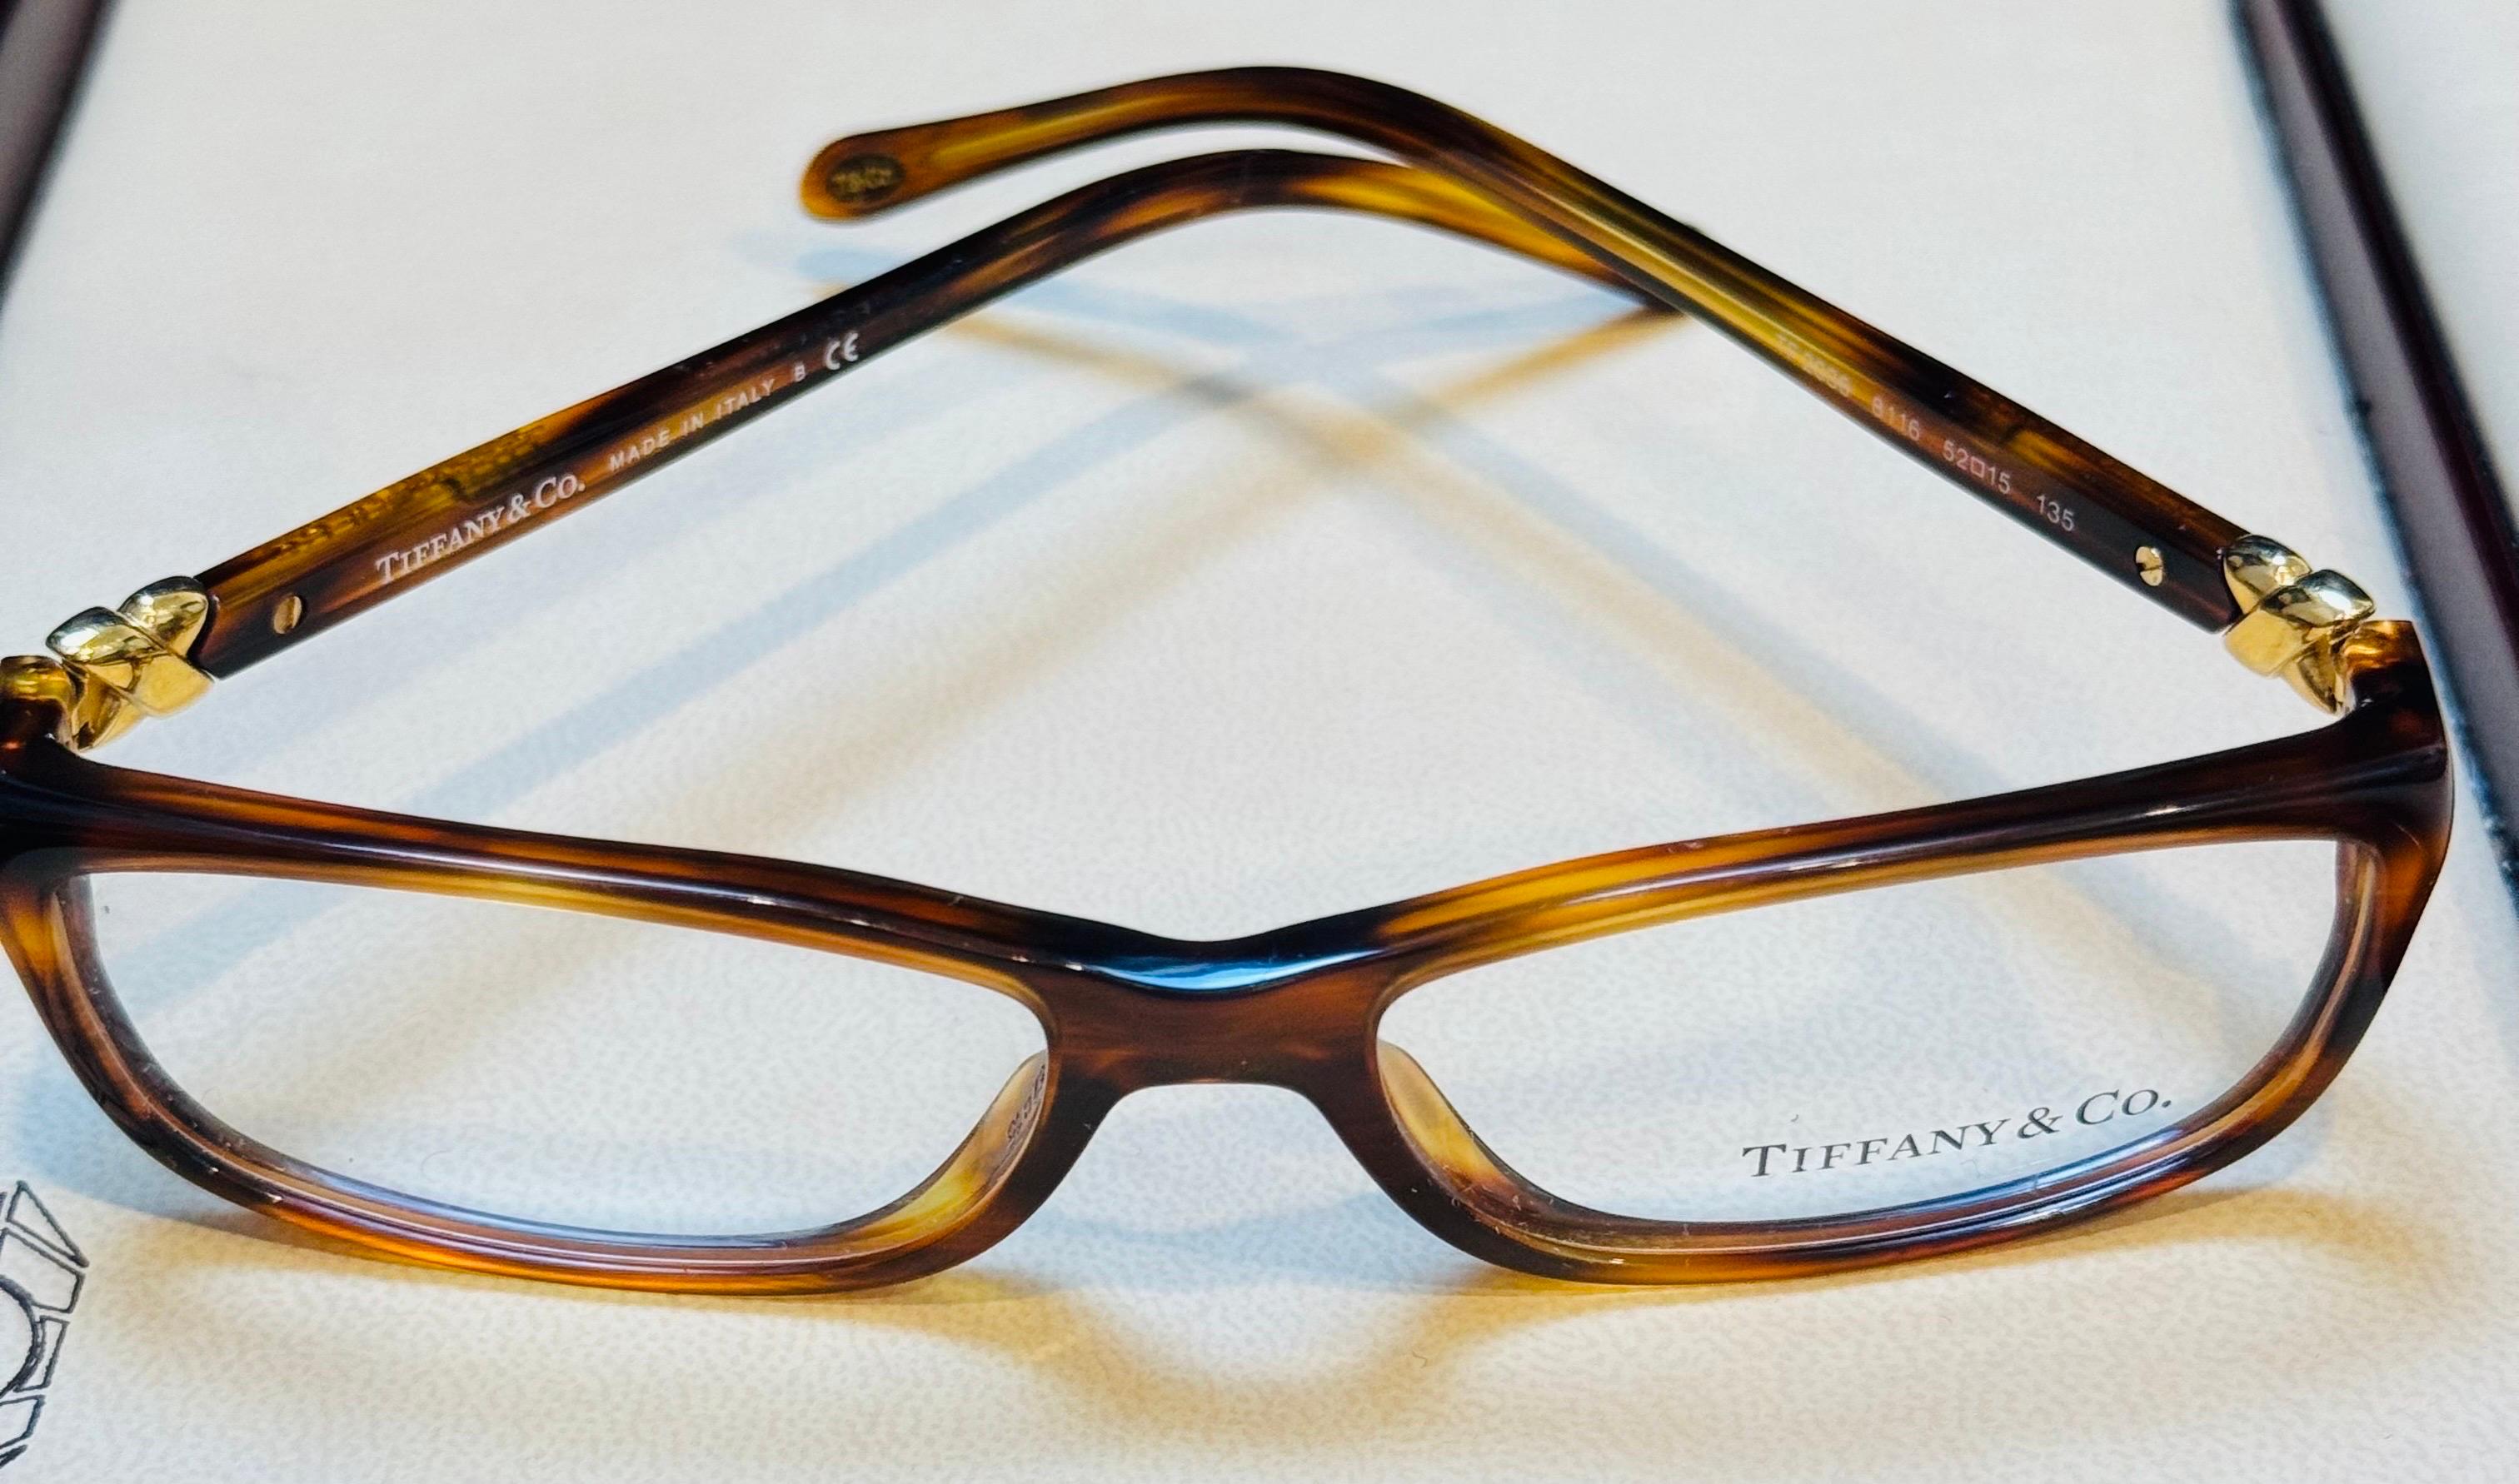 
You are looking at a pair of exclusive Tiffany & Co. TF 2036 Eyeglasses.

Brand: Tiffany & Co.
Model: TF 2036
Gender: Women
Frame Color: 8116 / Havana Honey Brown
Arms: Engraved logo Tiffany & Co. signature on both temples
Includes: Original 